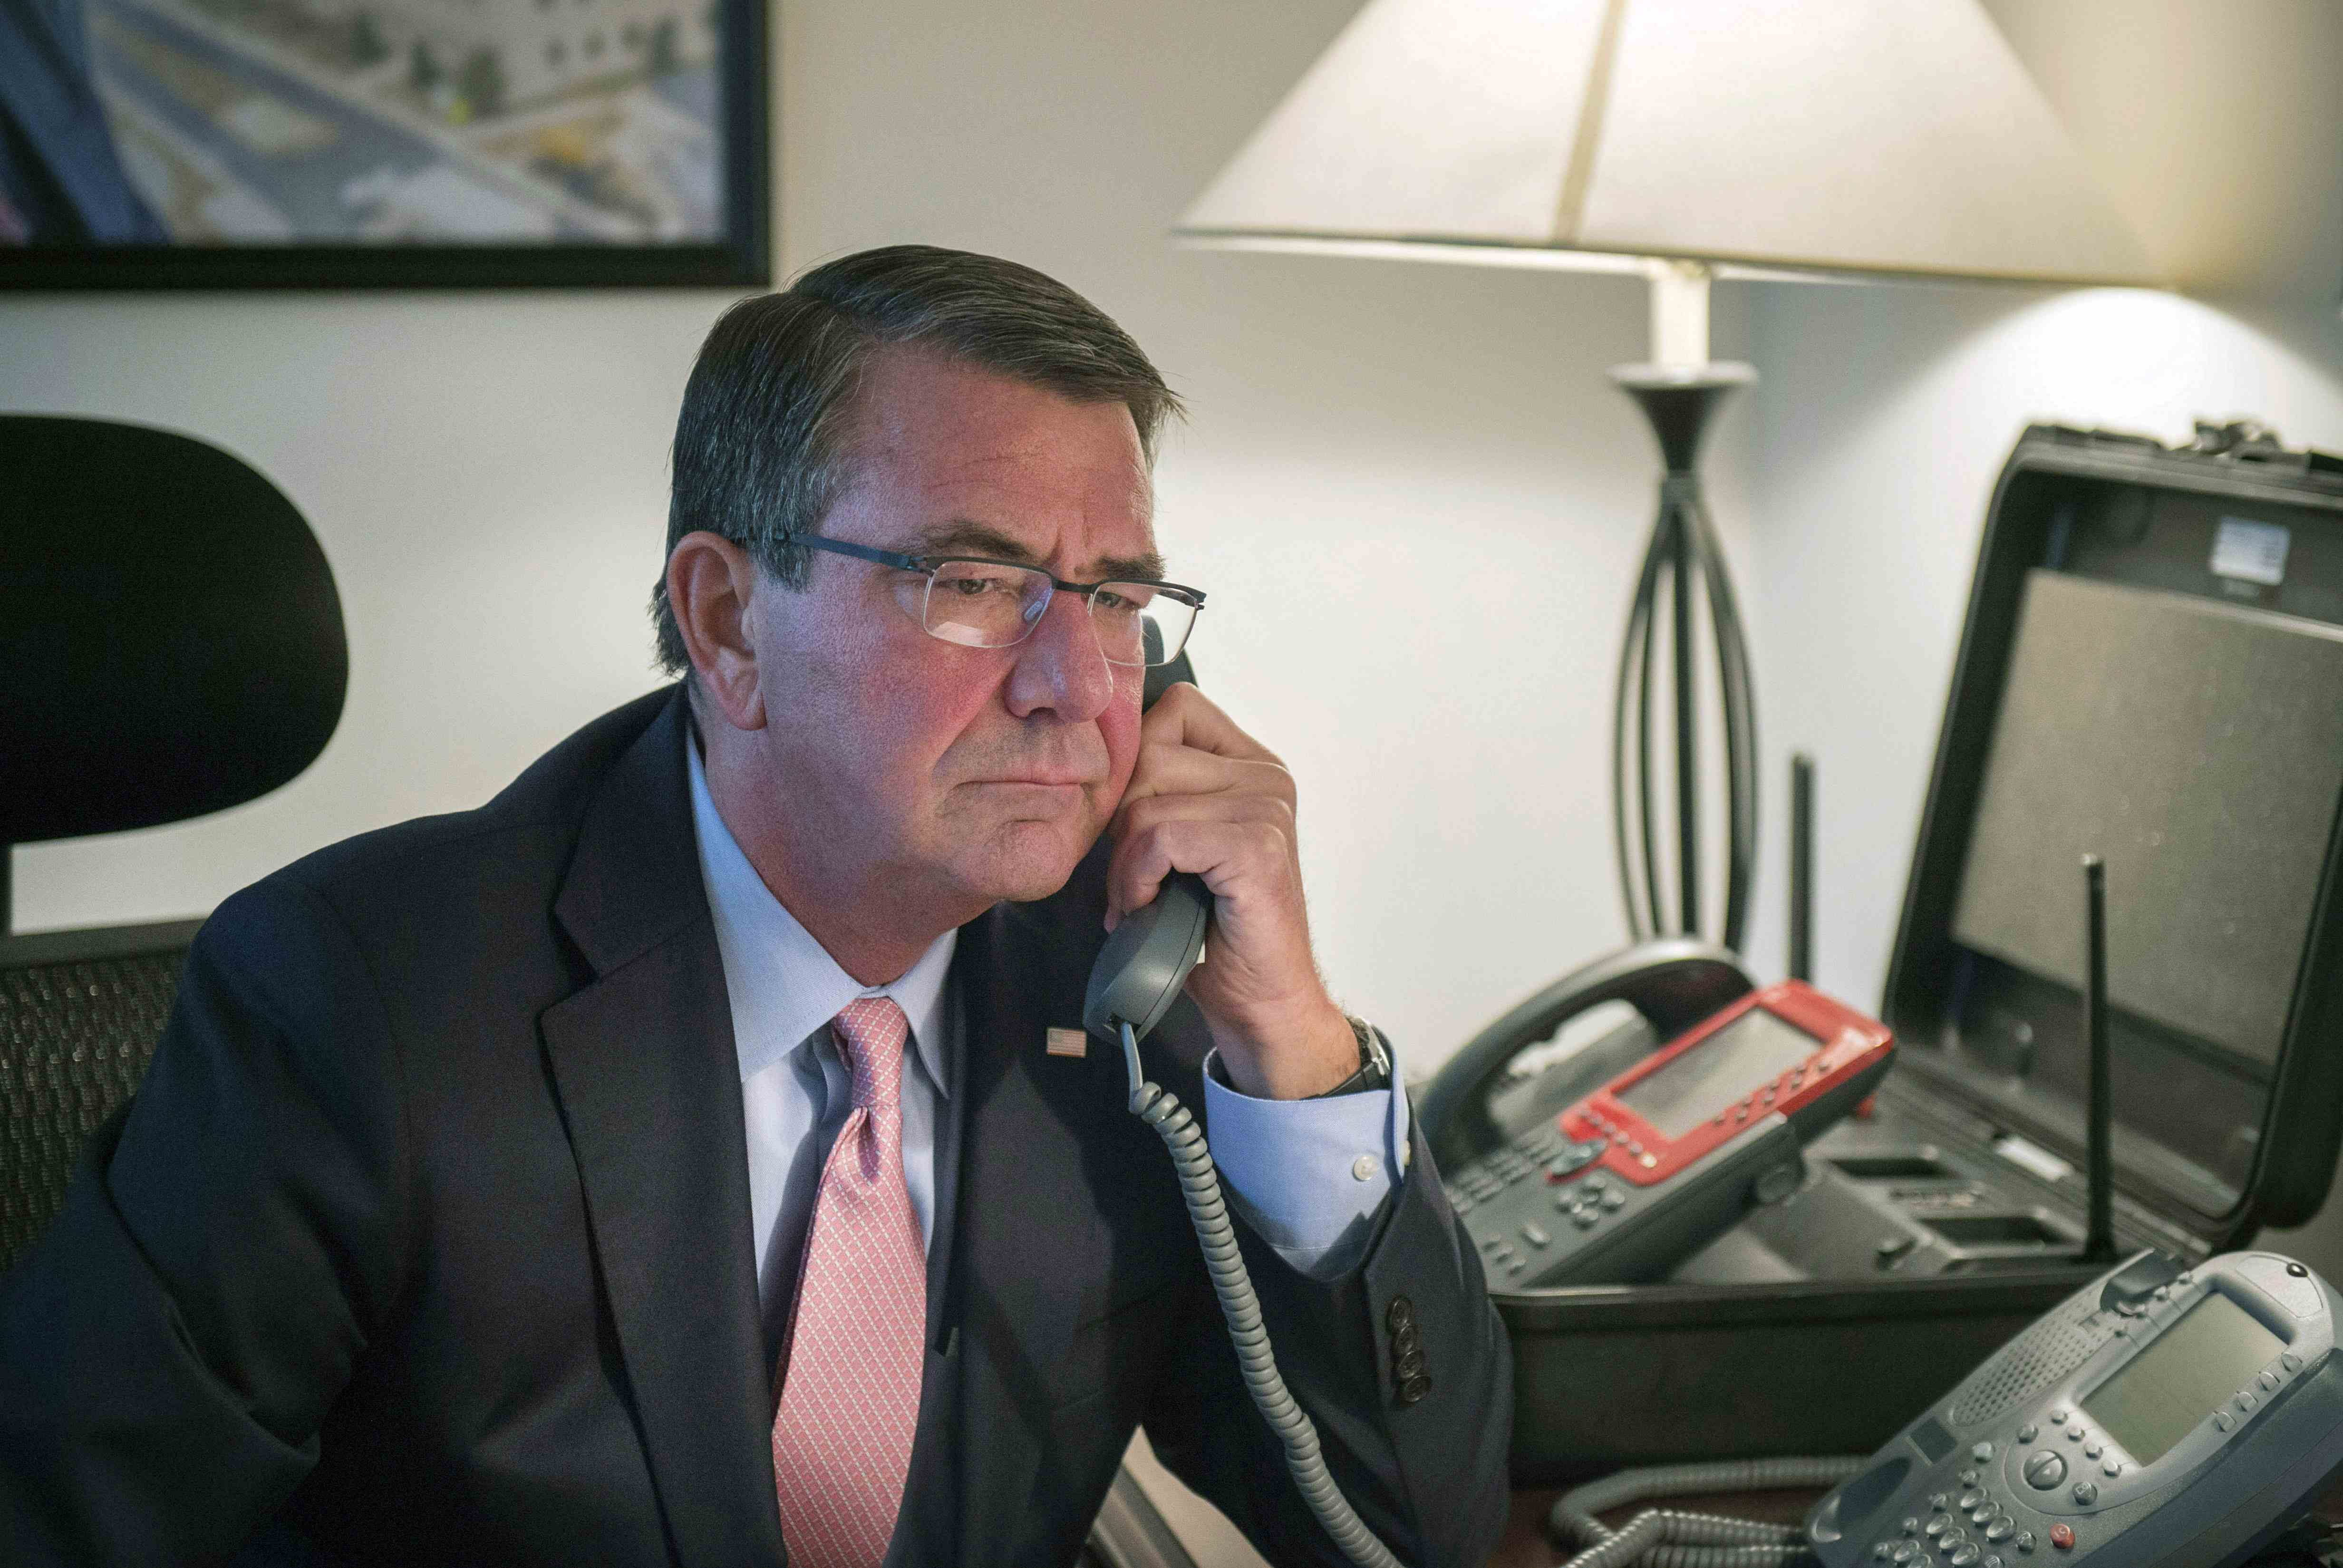 U.S. Secretary of Defense Ash Carter speaks on the telephone with Japanese Defense Minister Gen Nakatani in this photo released by the U.S. Department of Defense on Saturday. | REUTERS